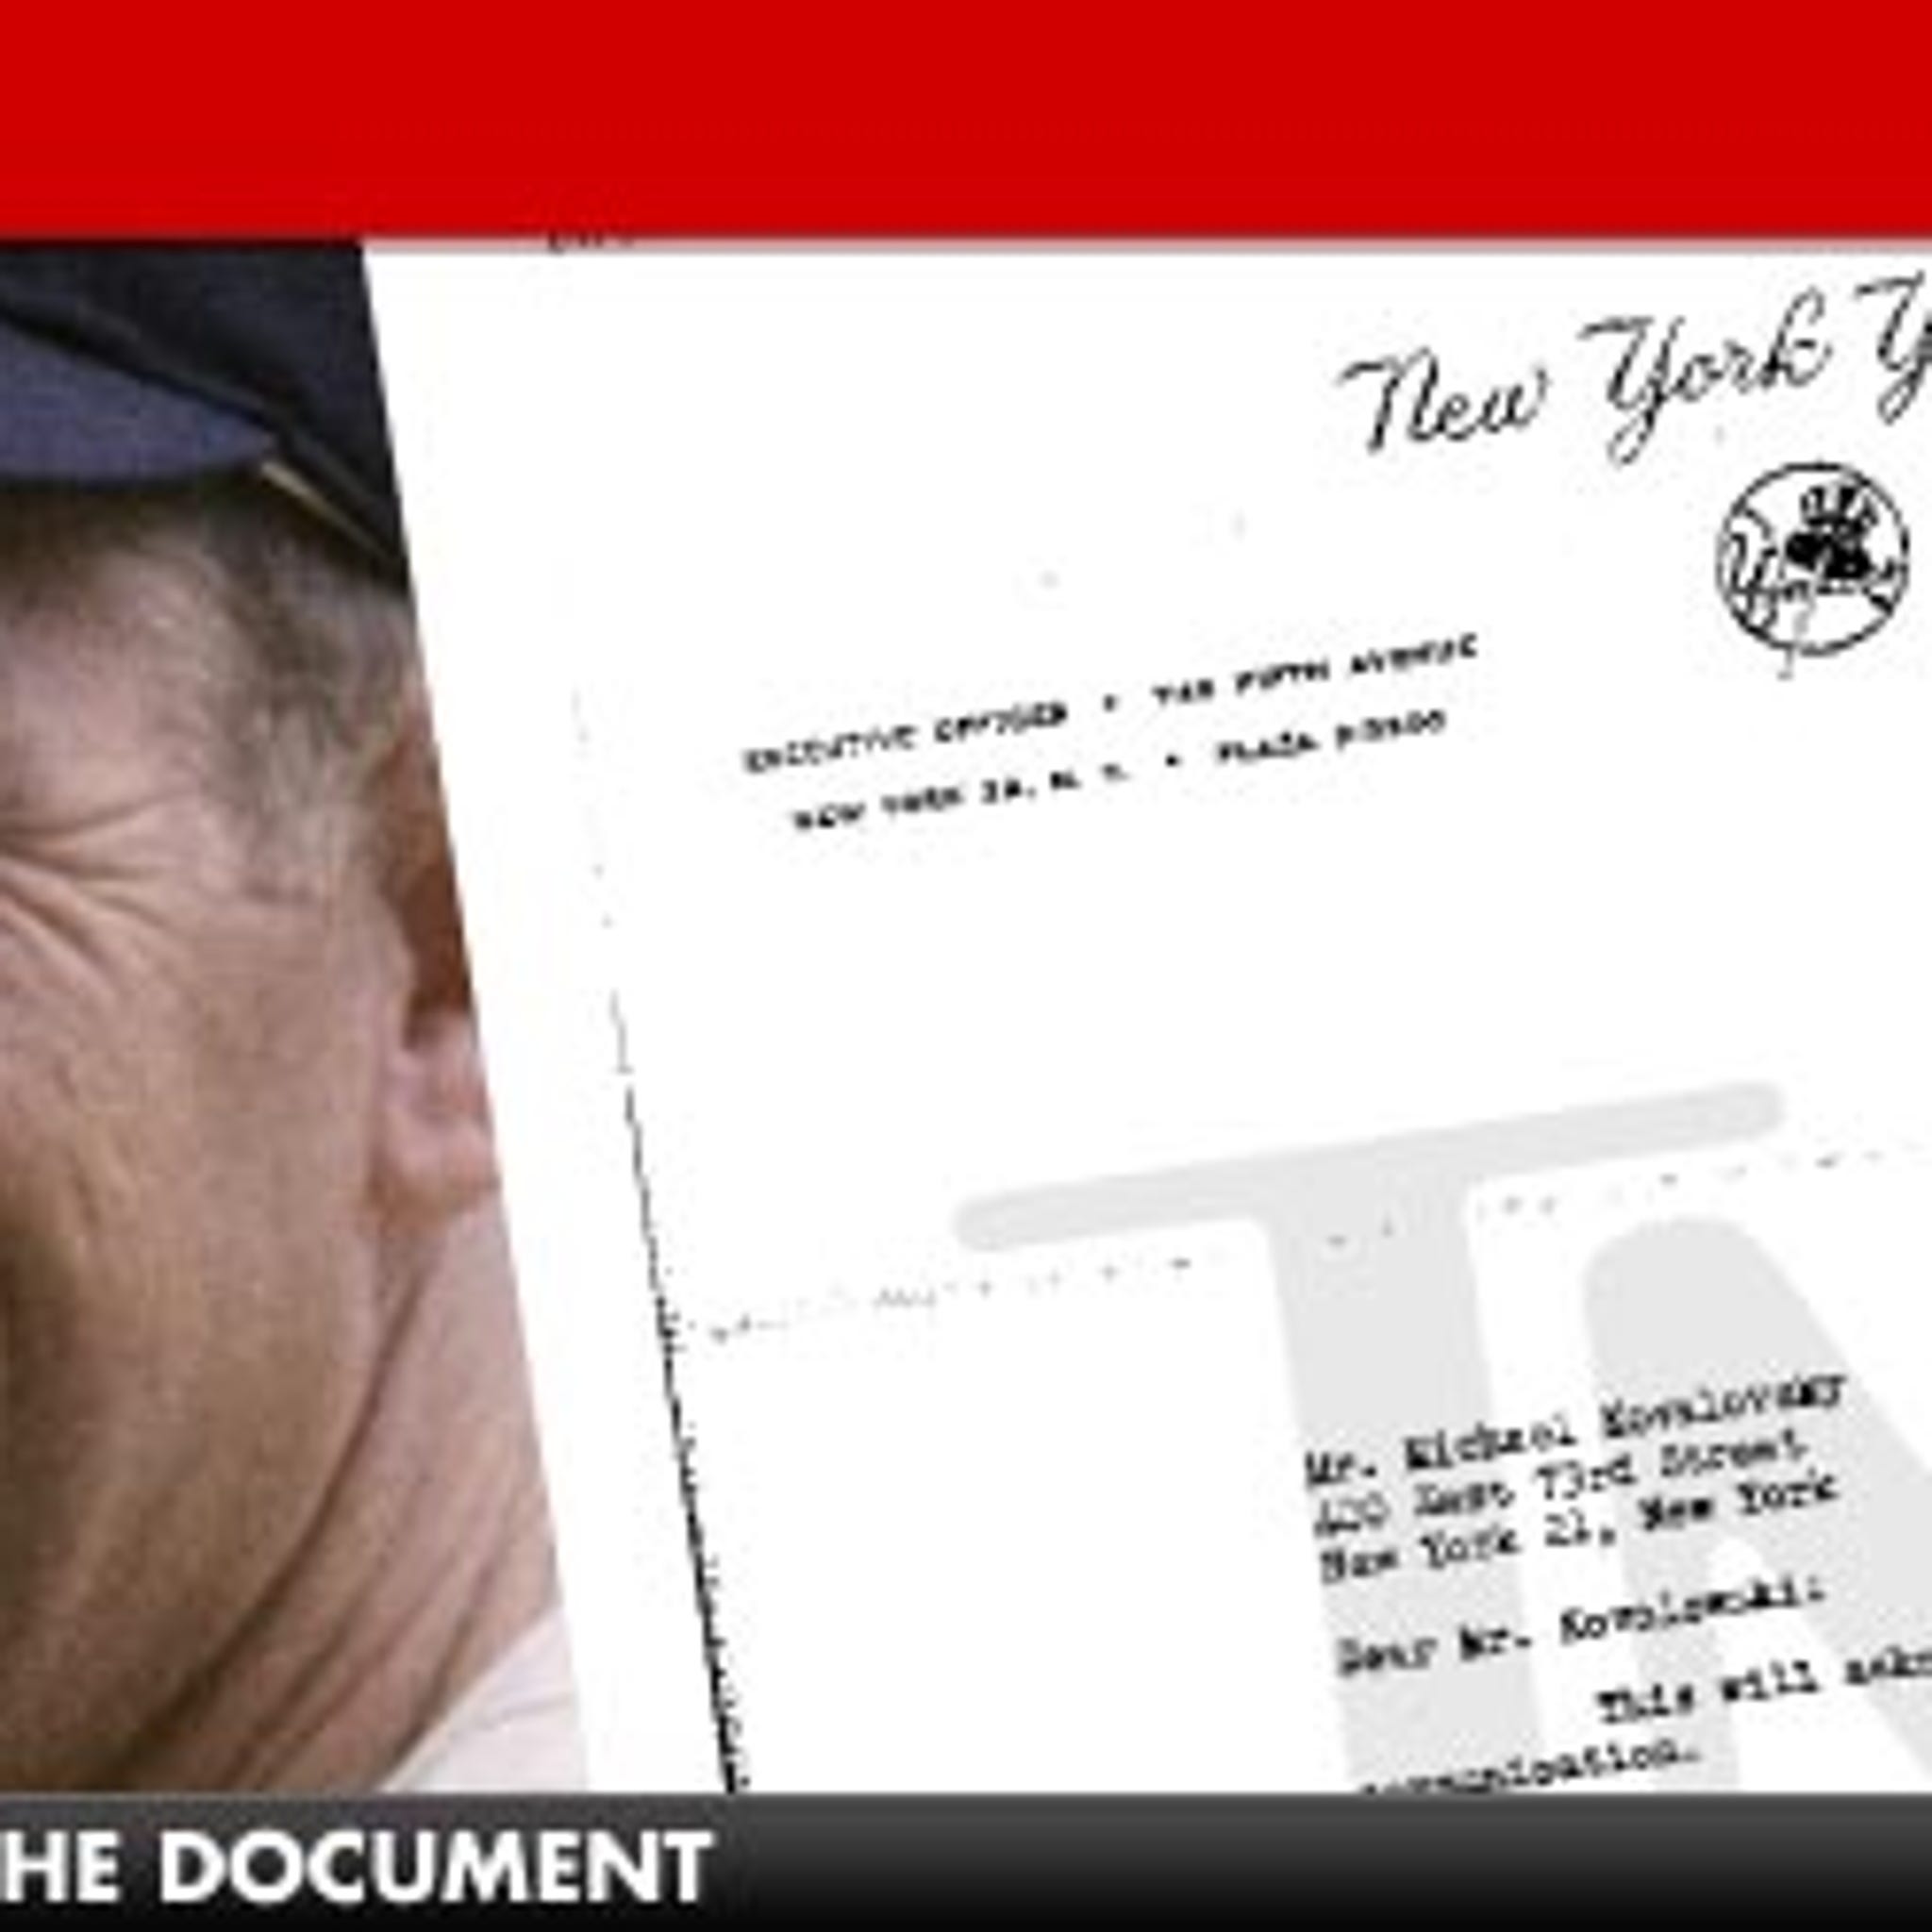 What is mysterious Yankees Letter from MLB that's being unsealed?